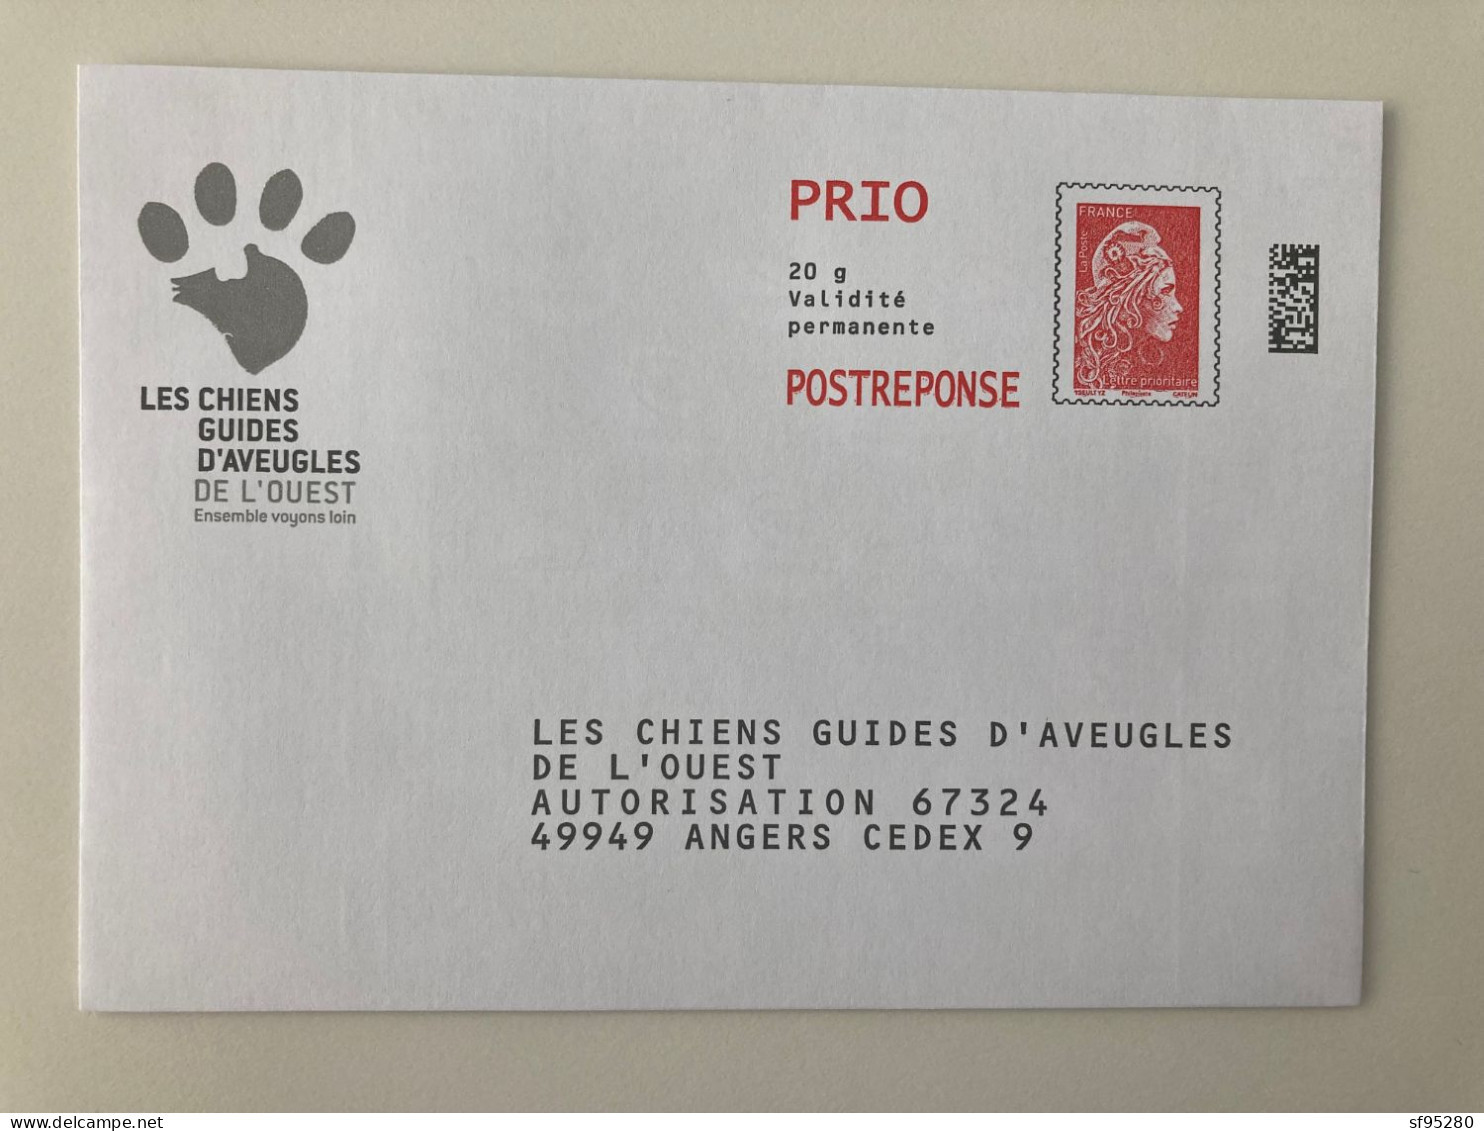 PAP REPONSE YSEULT YZ CATELIN LES CHIENS GUIDES D'AVEUGLES 368730 - Prêts-à-poster:reply